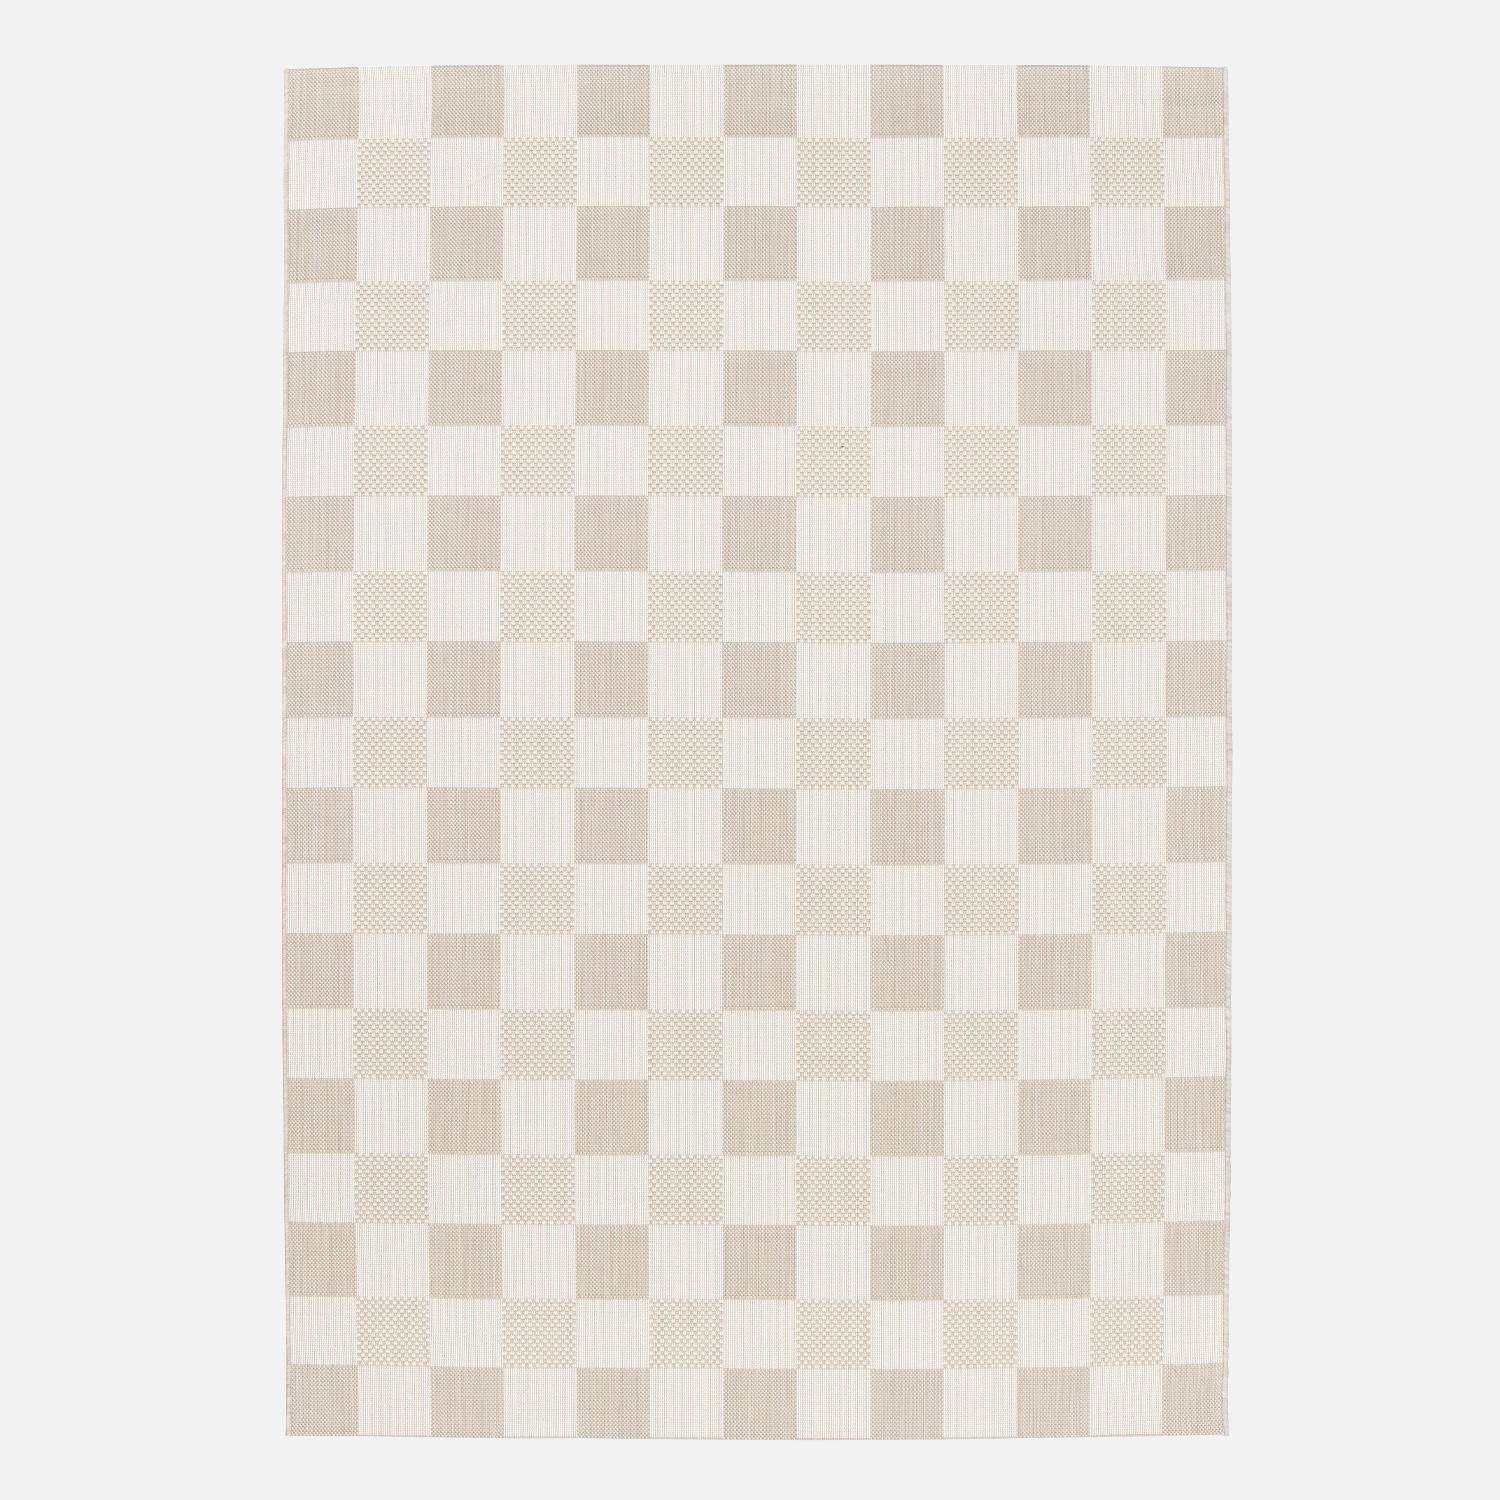 Indoor/outdoor carpet with beige chequered pattern, recycled polyester, Damian, 120 x 170 cm Photo2